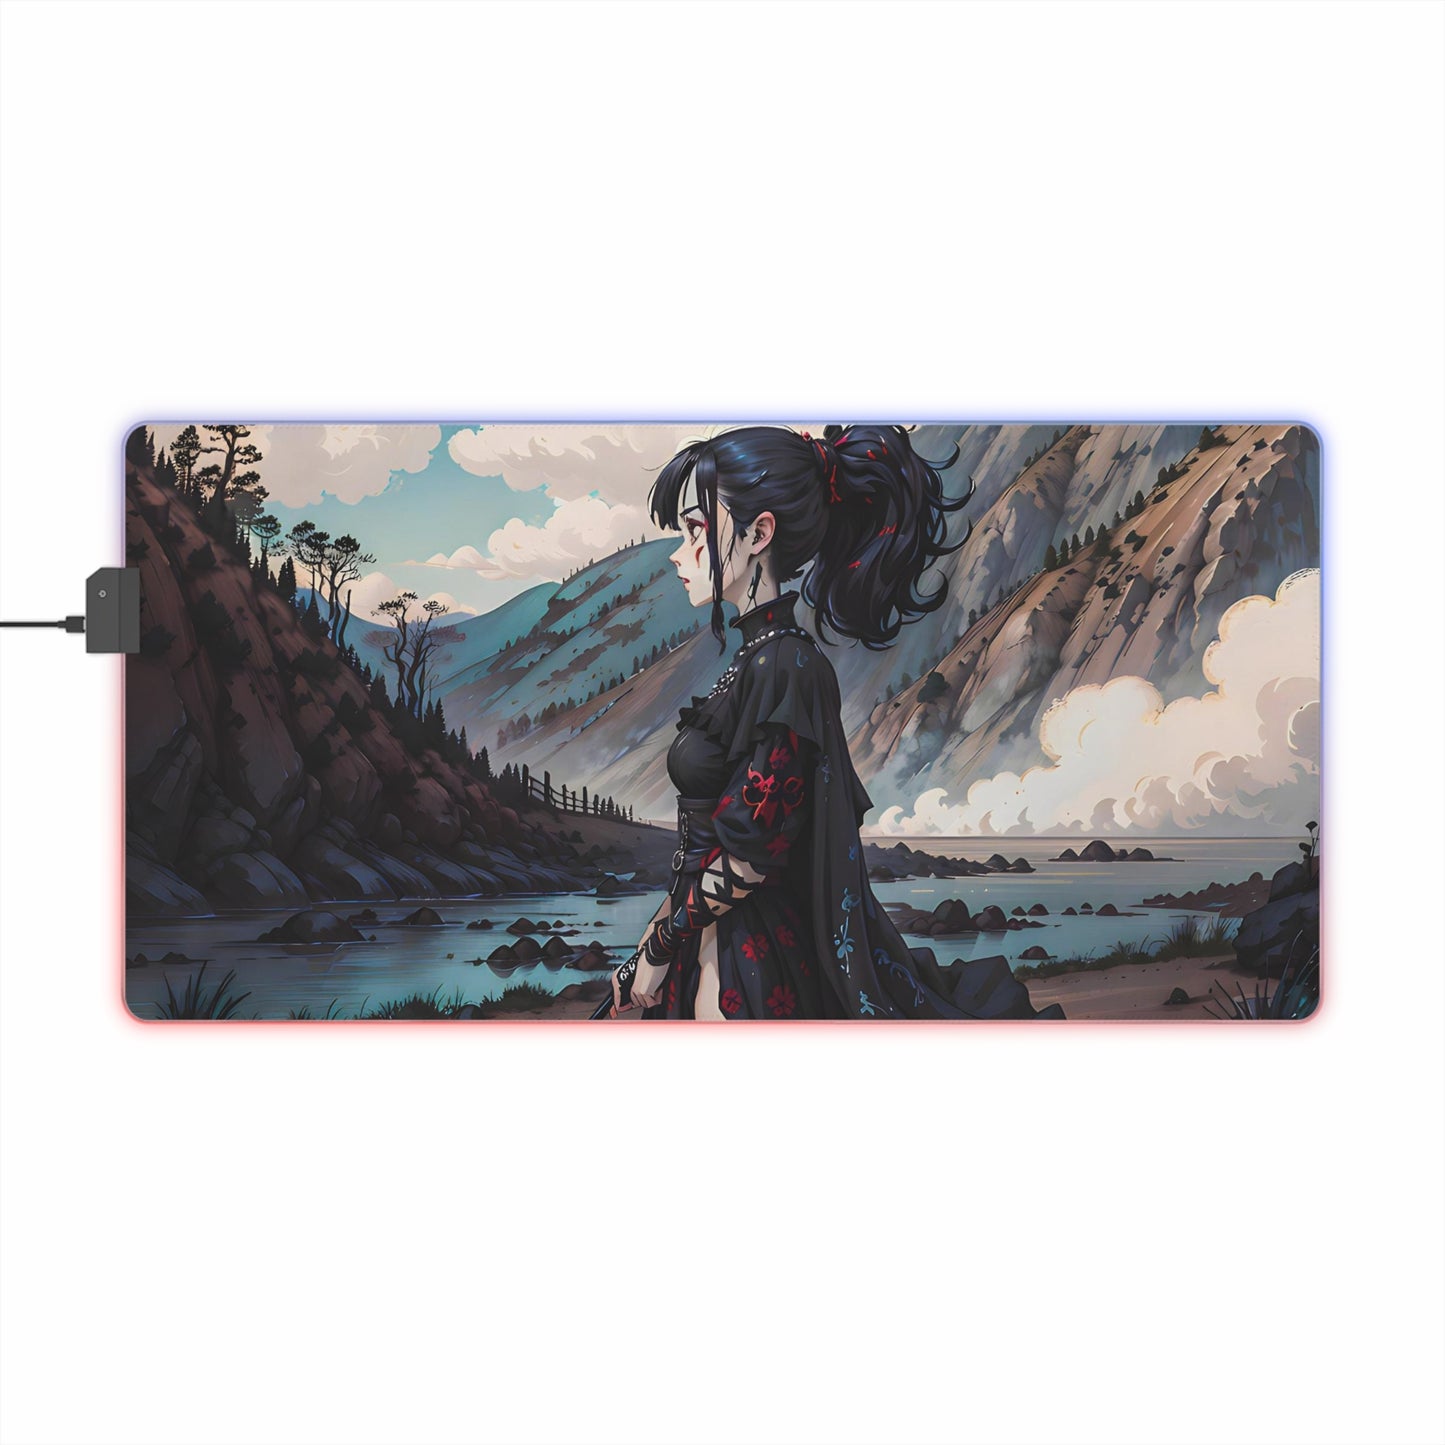 Graceful Mountain Maiden LED Gaming Mouse Pad